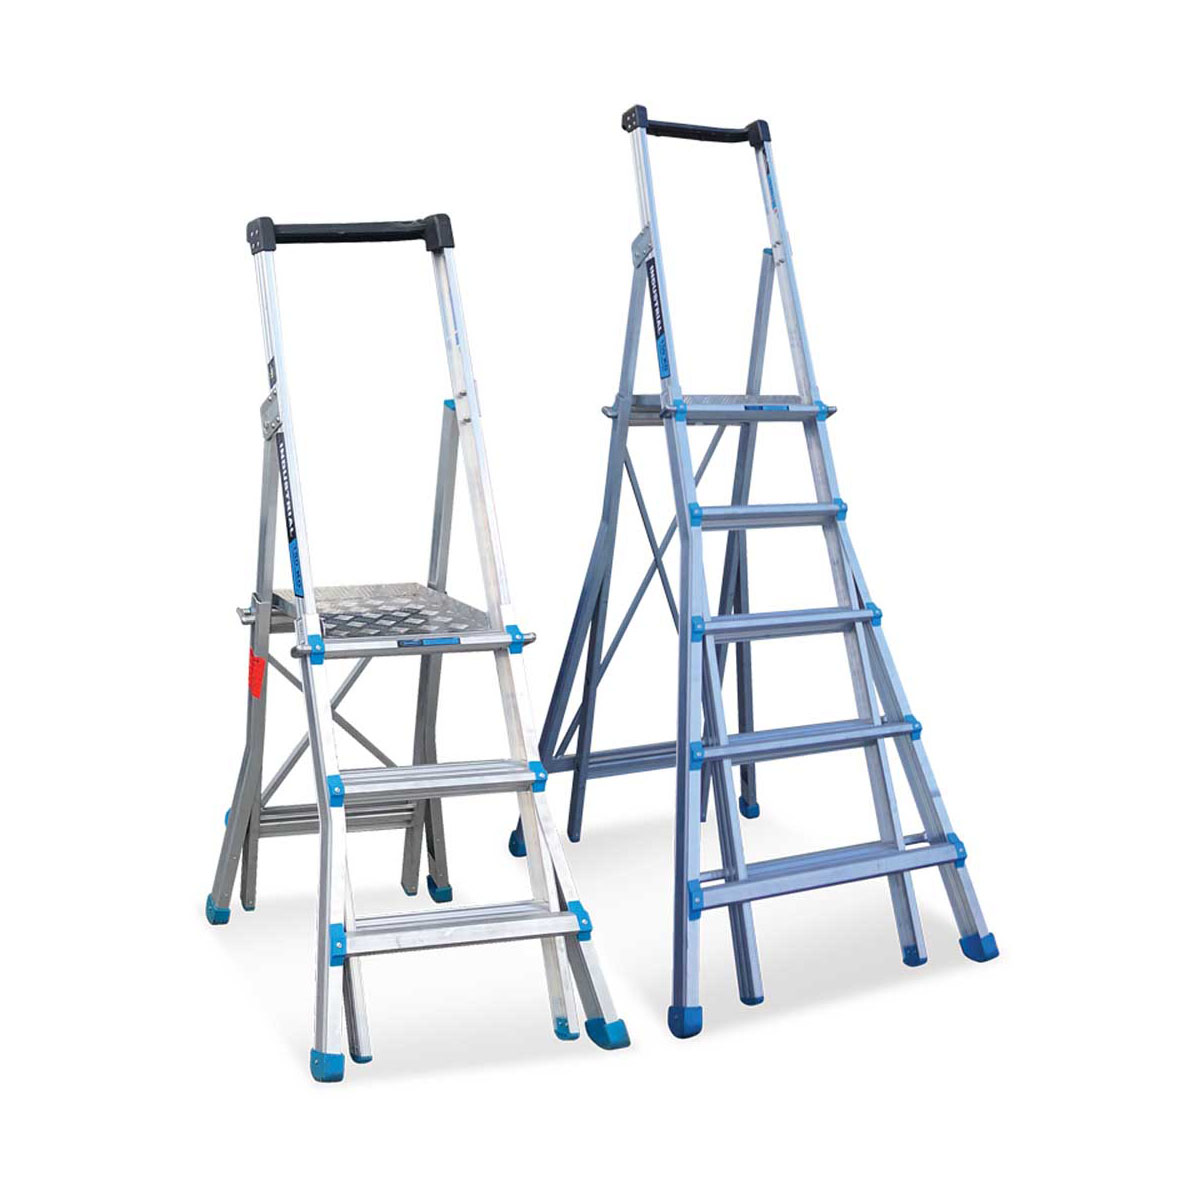 Buy Platform Ladders - Telescopic available at Astrolift NZ